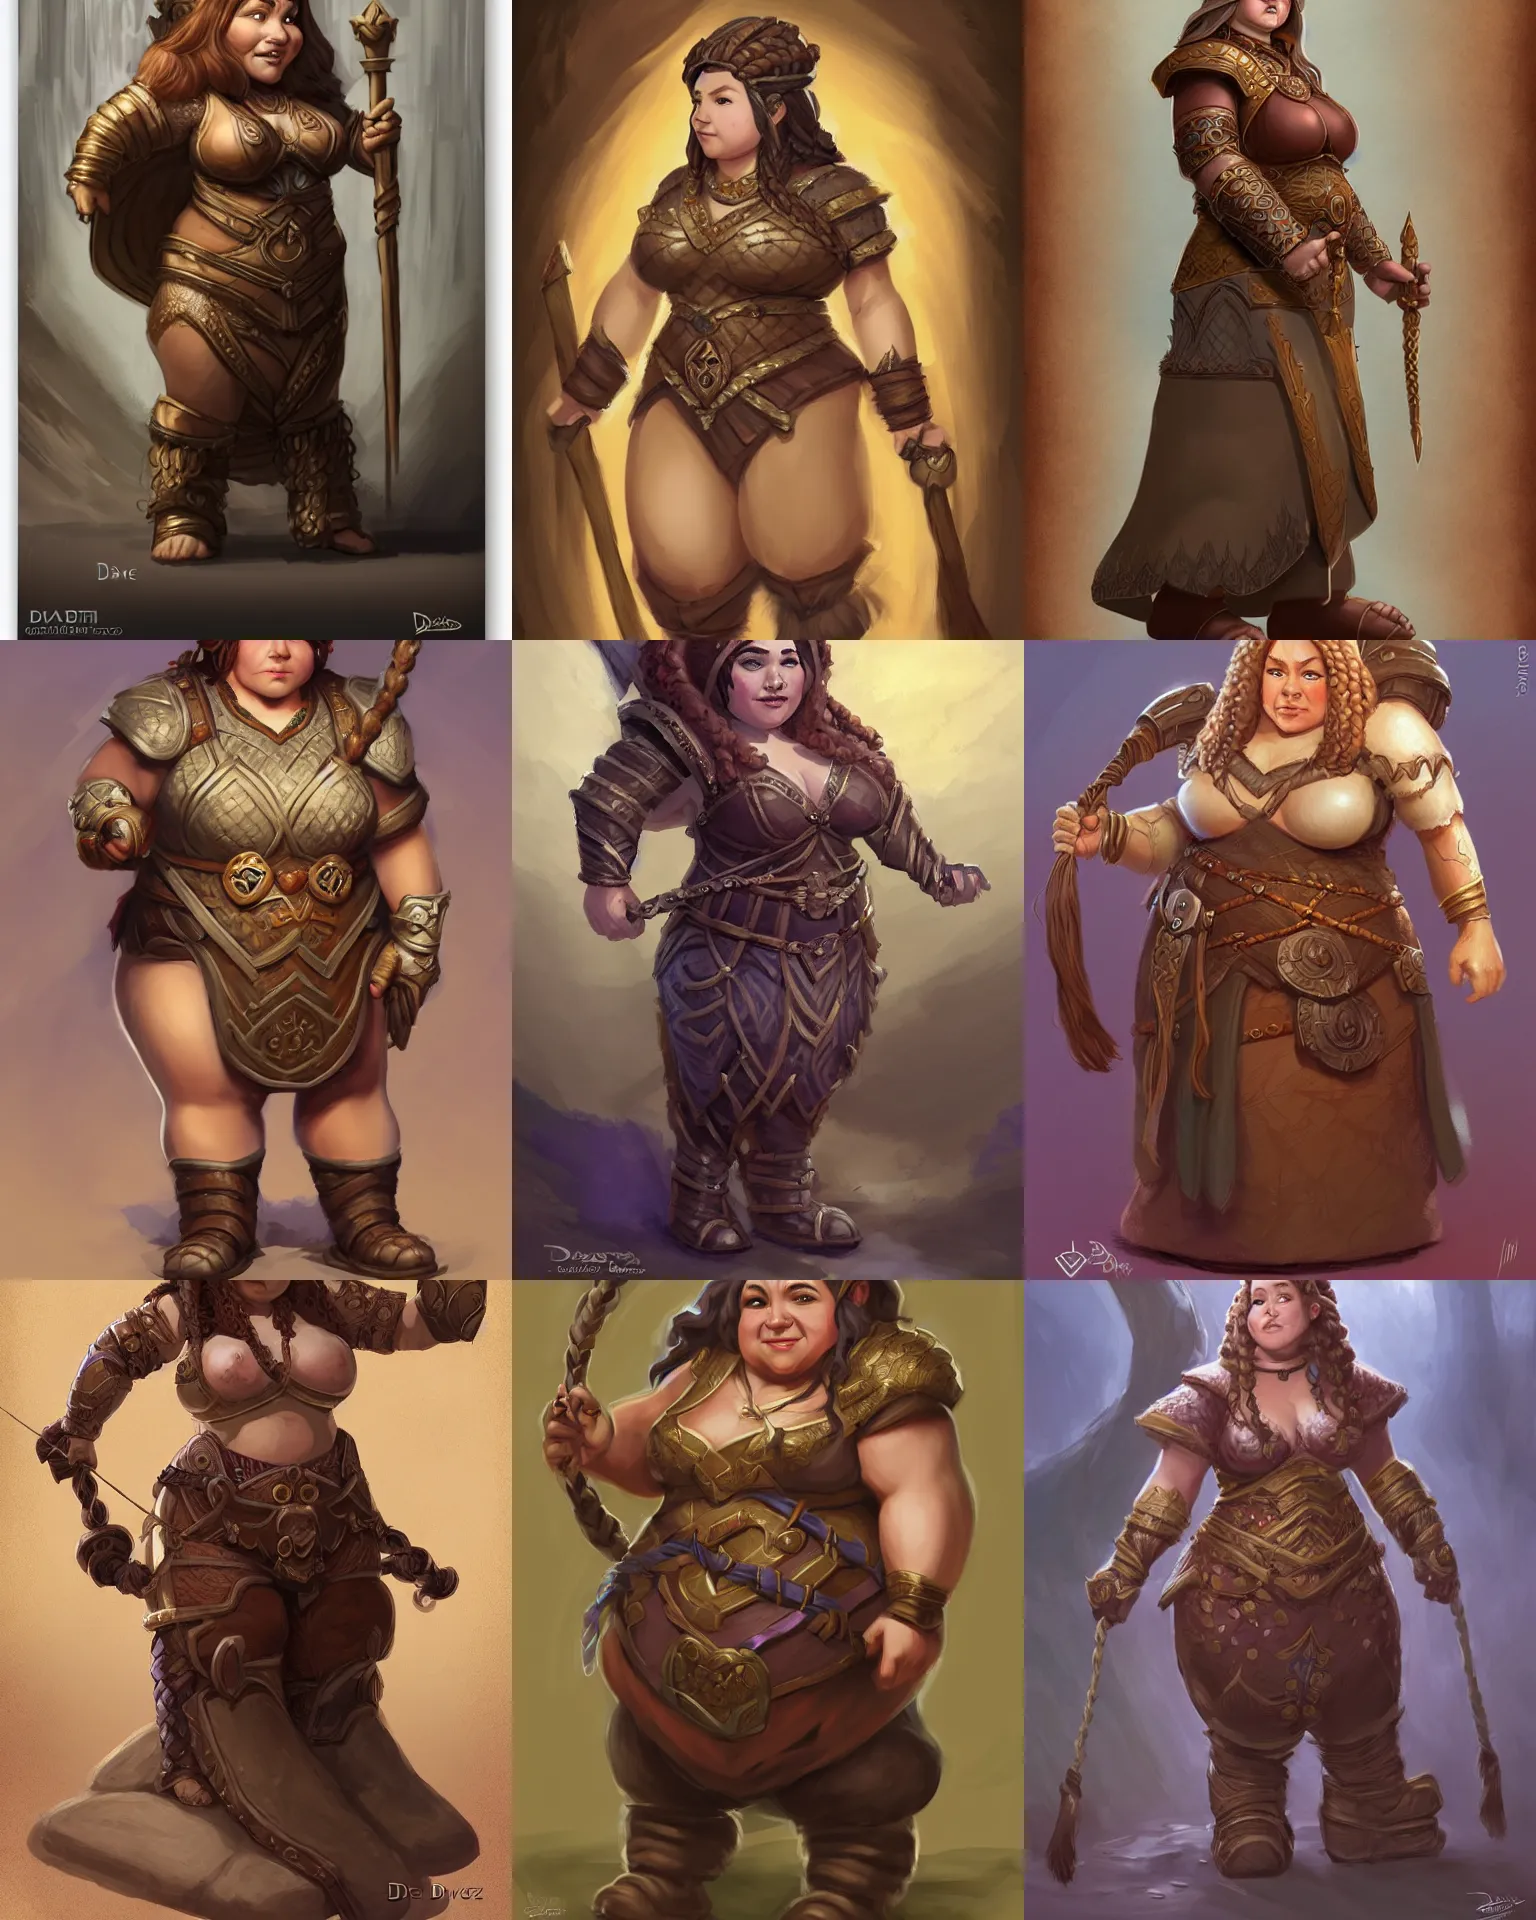 Prompt: female dwarven noblewoman, chubby short stature, braided intricate hair, by dave greco